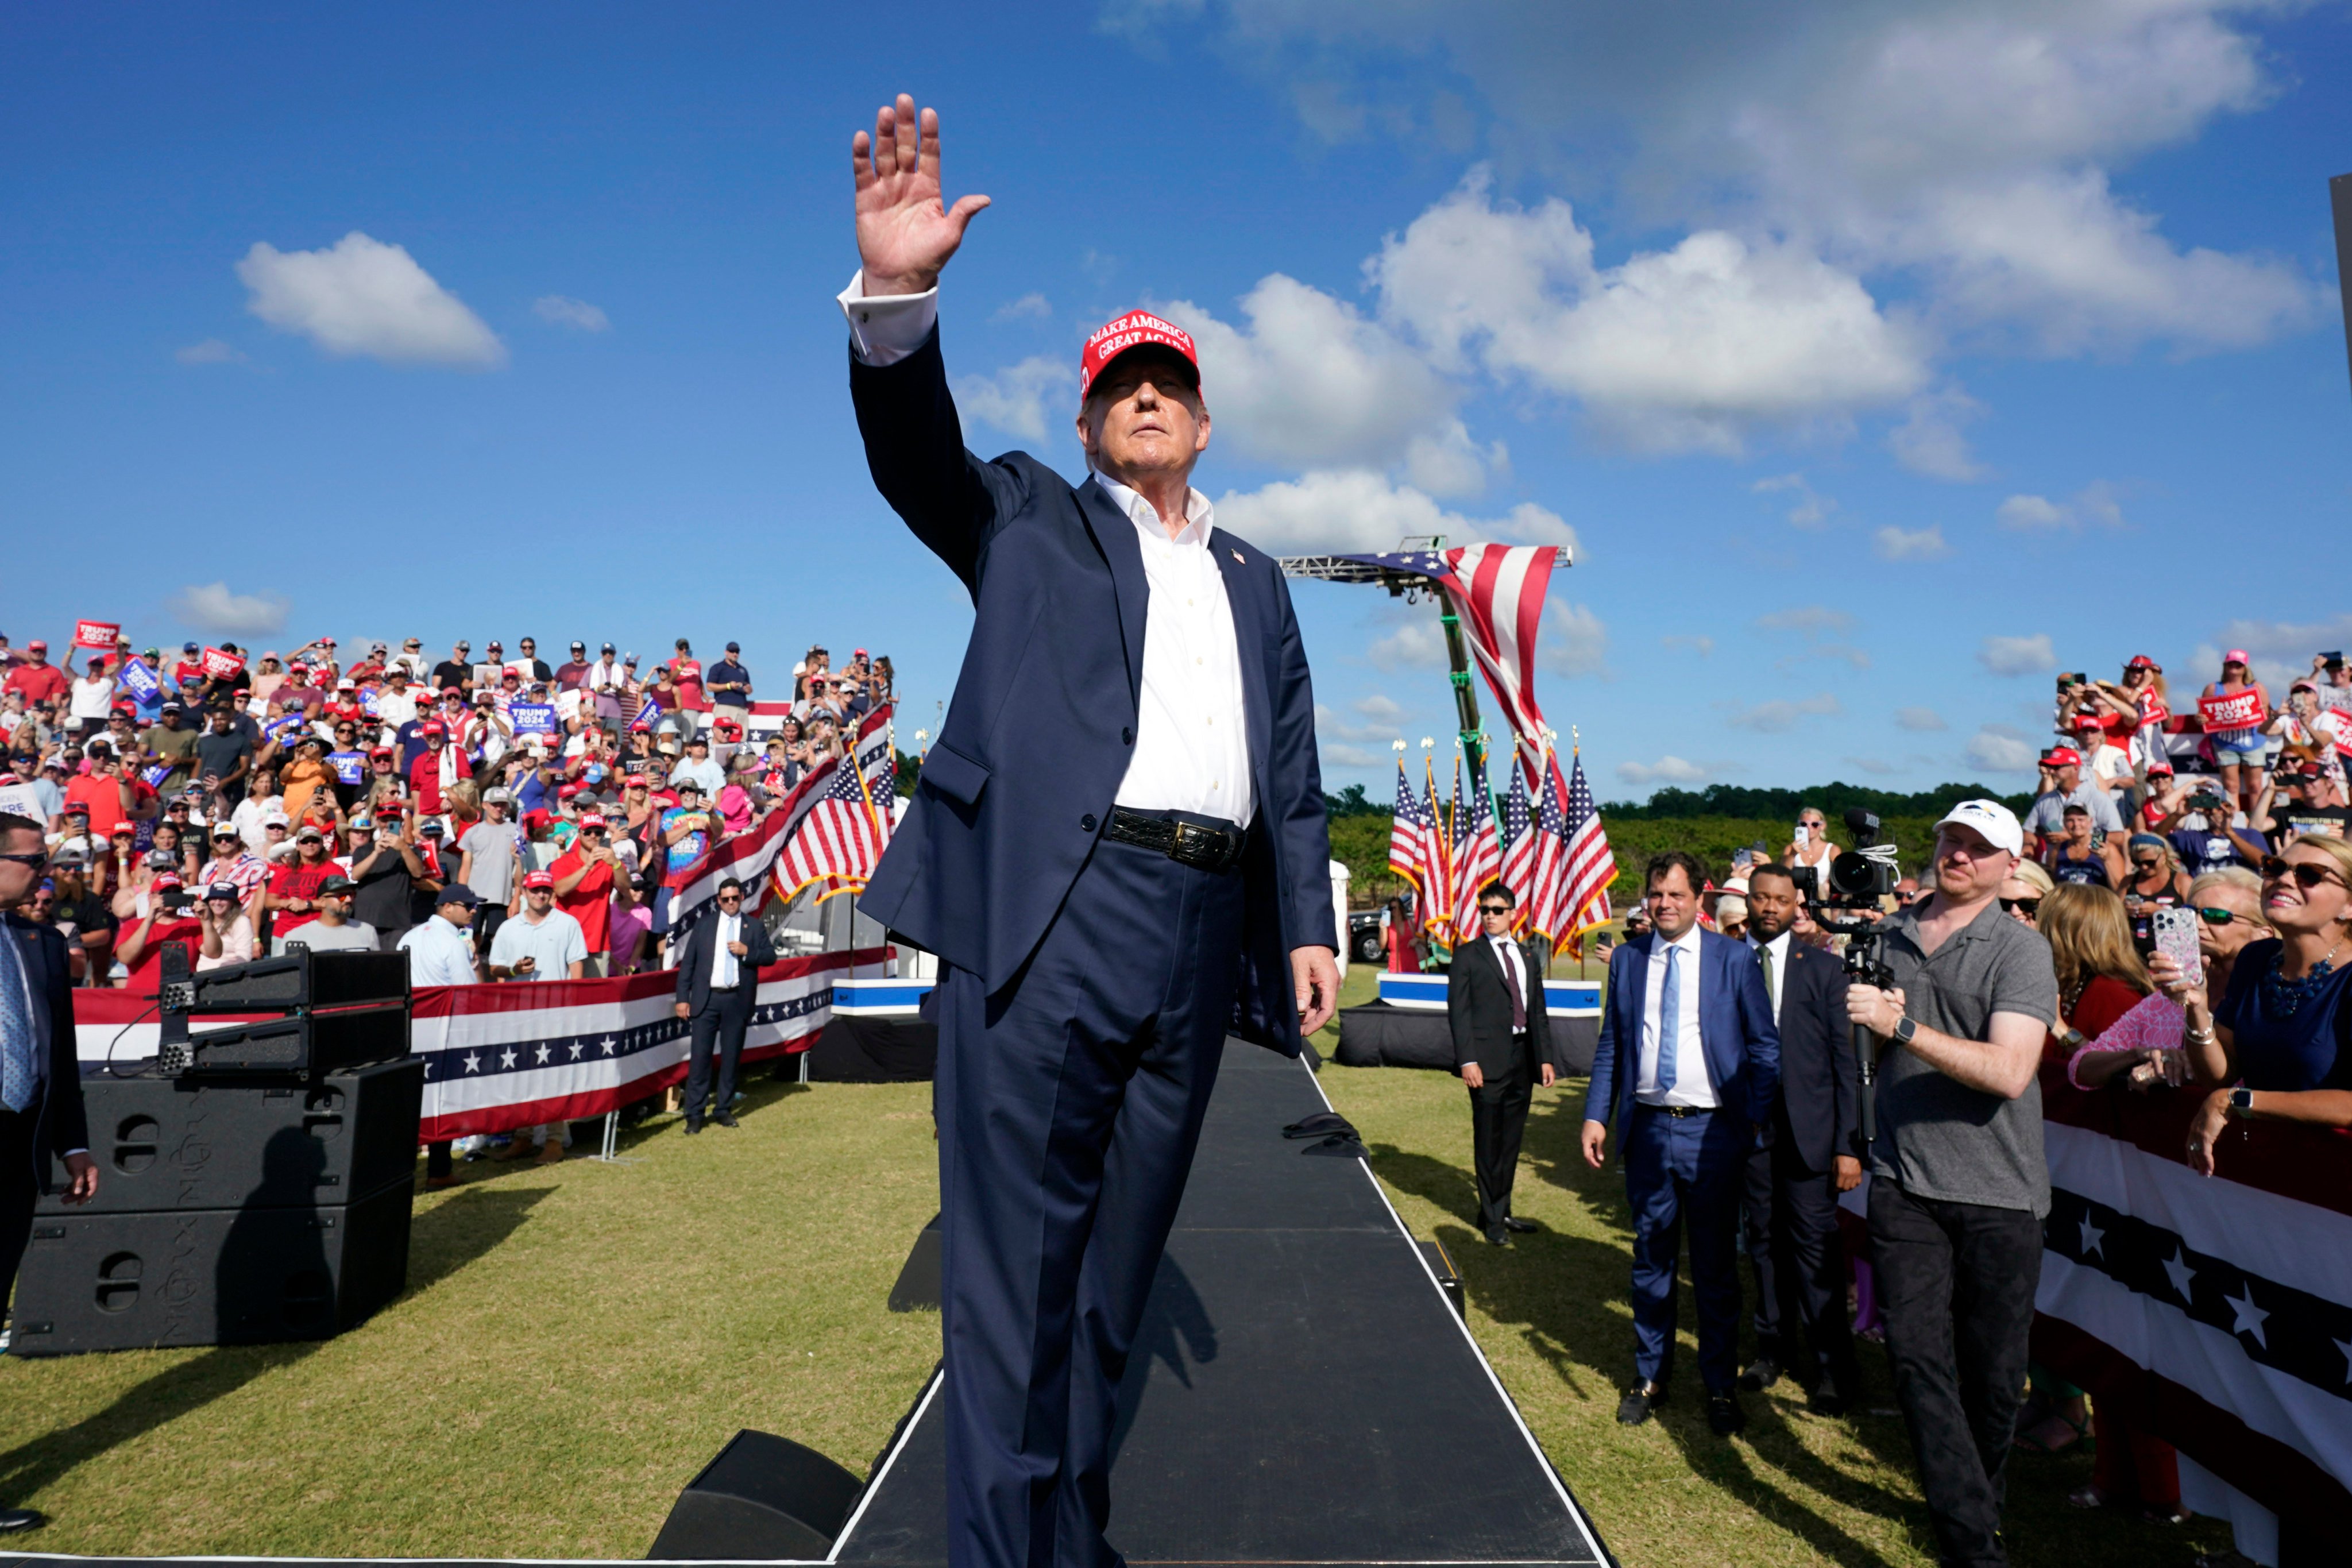 Former US president Donald Trump waves at a campaign rally in Virginia on June 28. Photo: AP